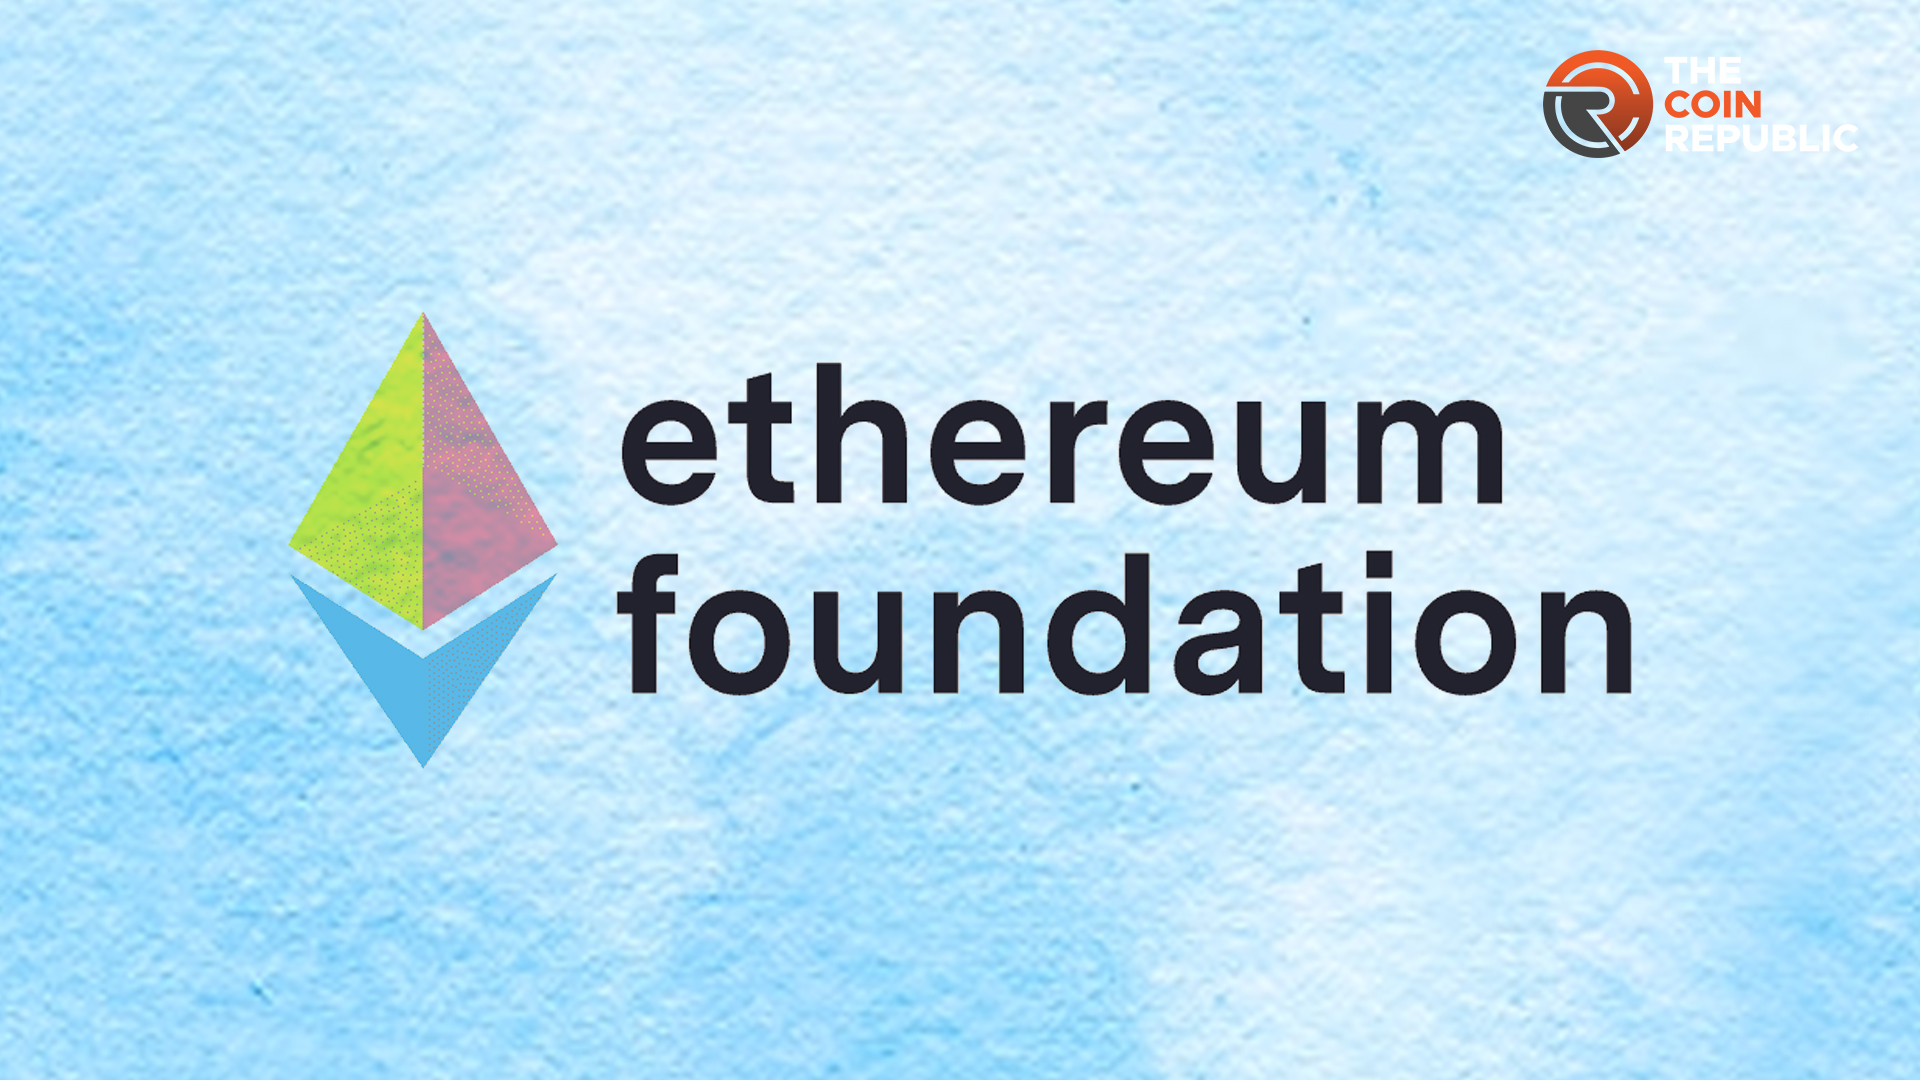 AMA on Ethereum Addresses Scalability, Privacy and Development